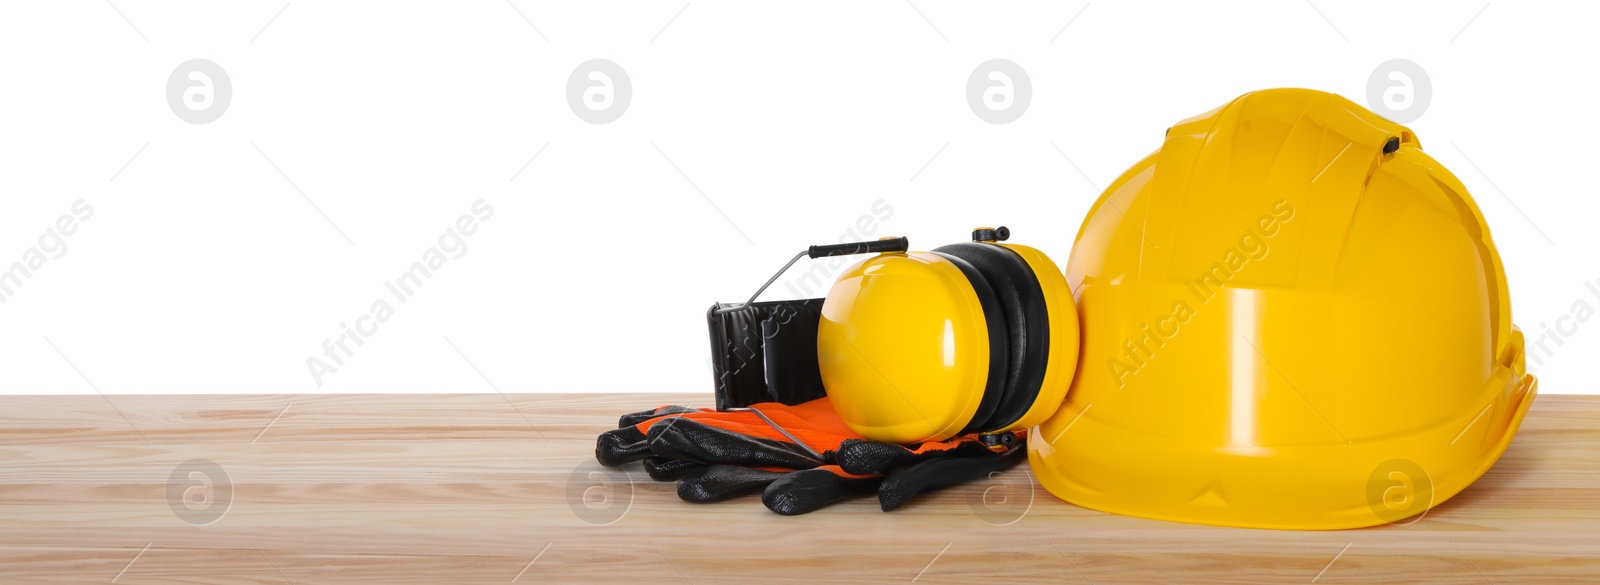 Photo of Hard hat, earmuffs and gloves on wooden table against white background. Safety equipment